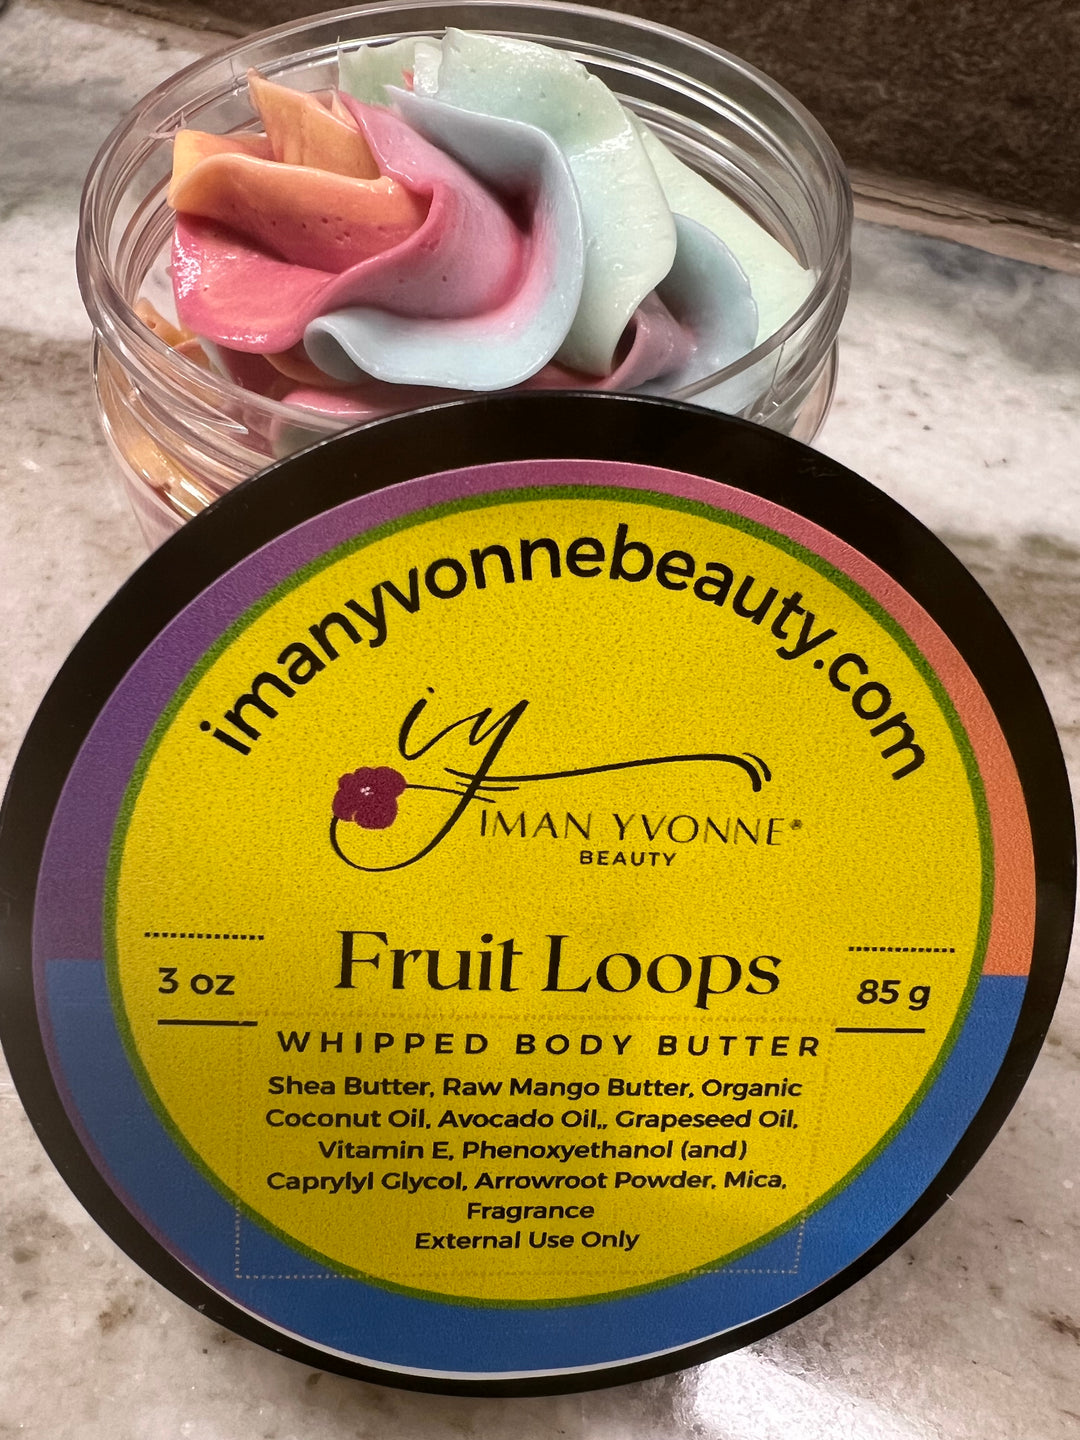 Whipped Body Butter-Fruit Loops